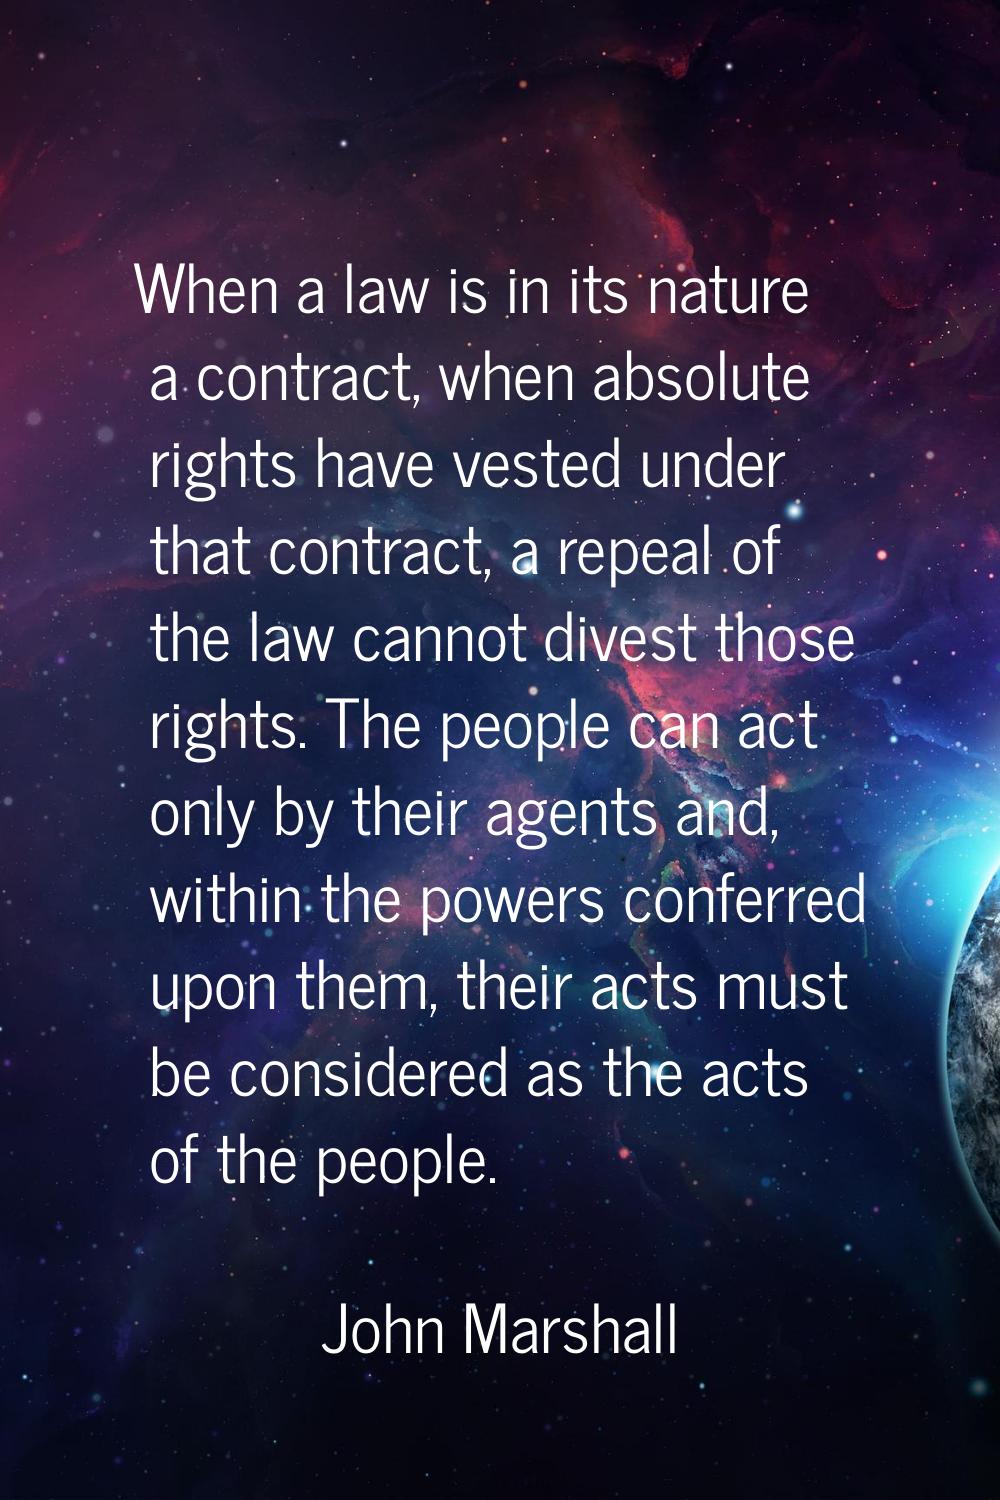 When a law is in its nature a contract, when absolute rights have vested under that contract, a rep